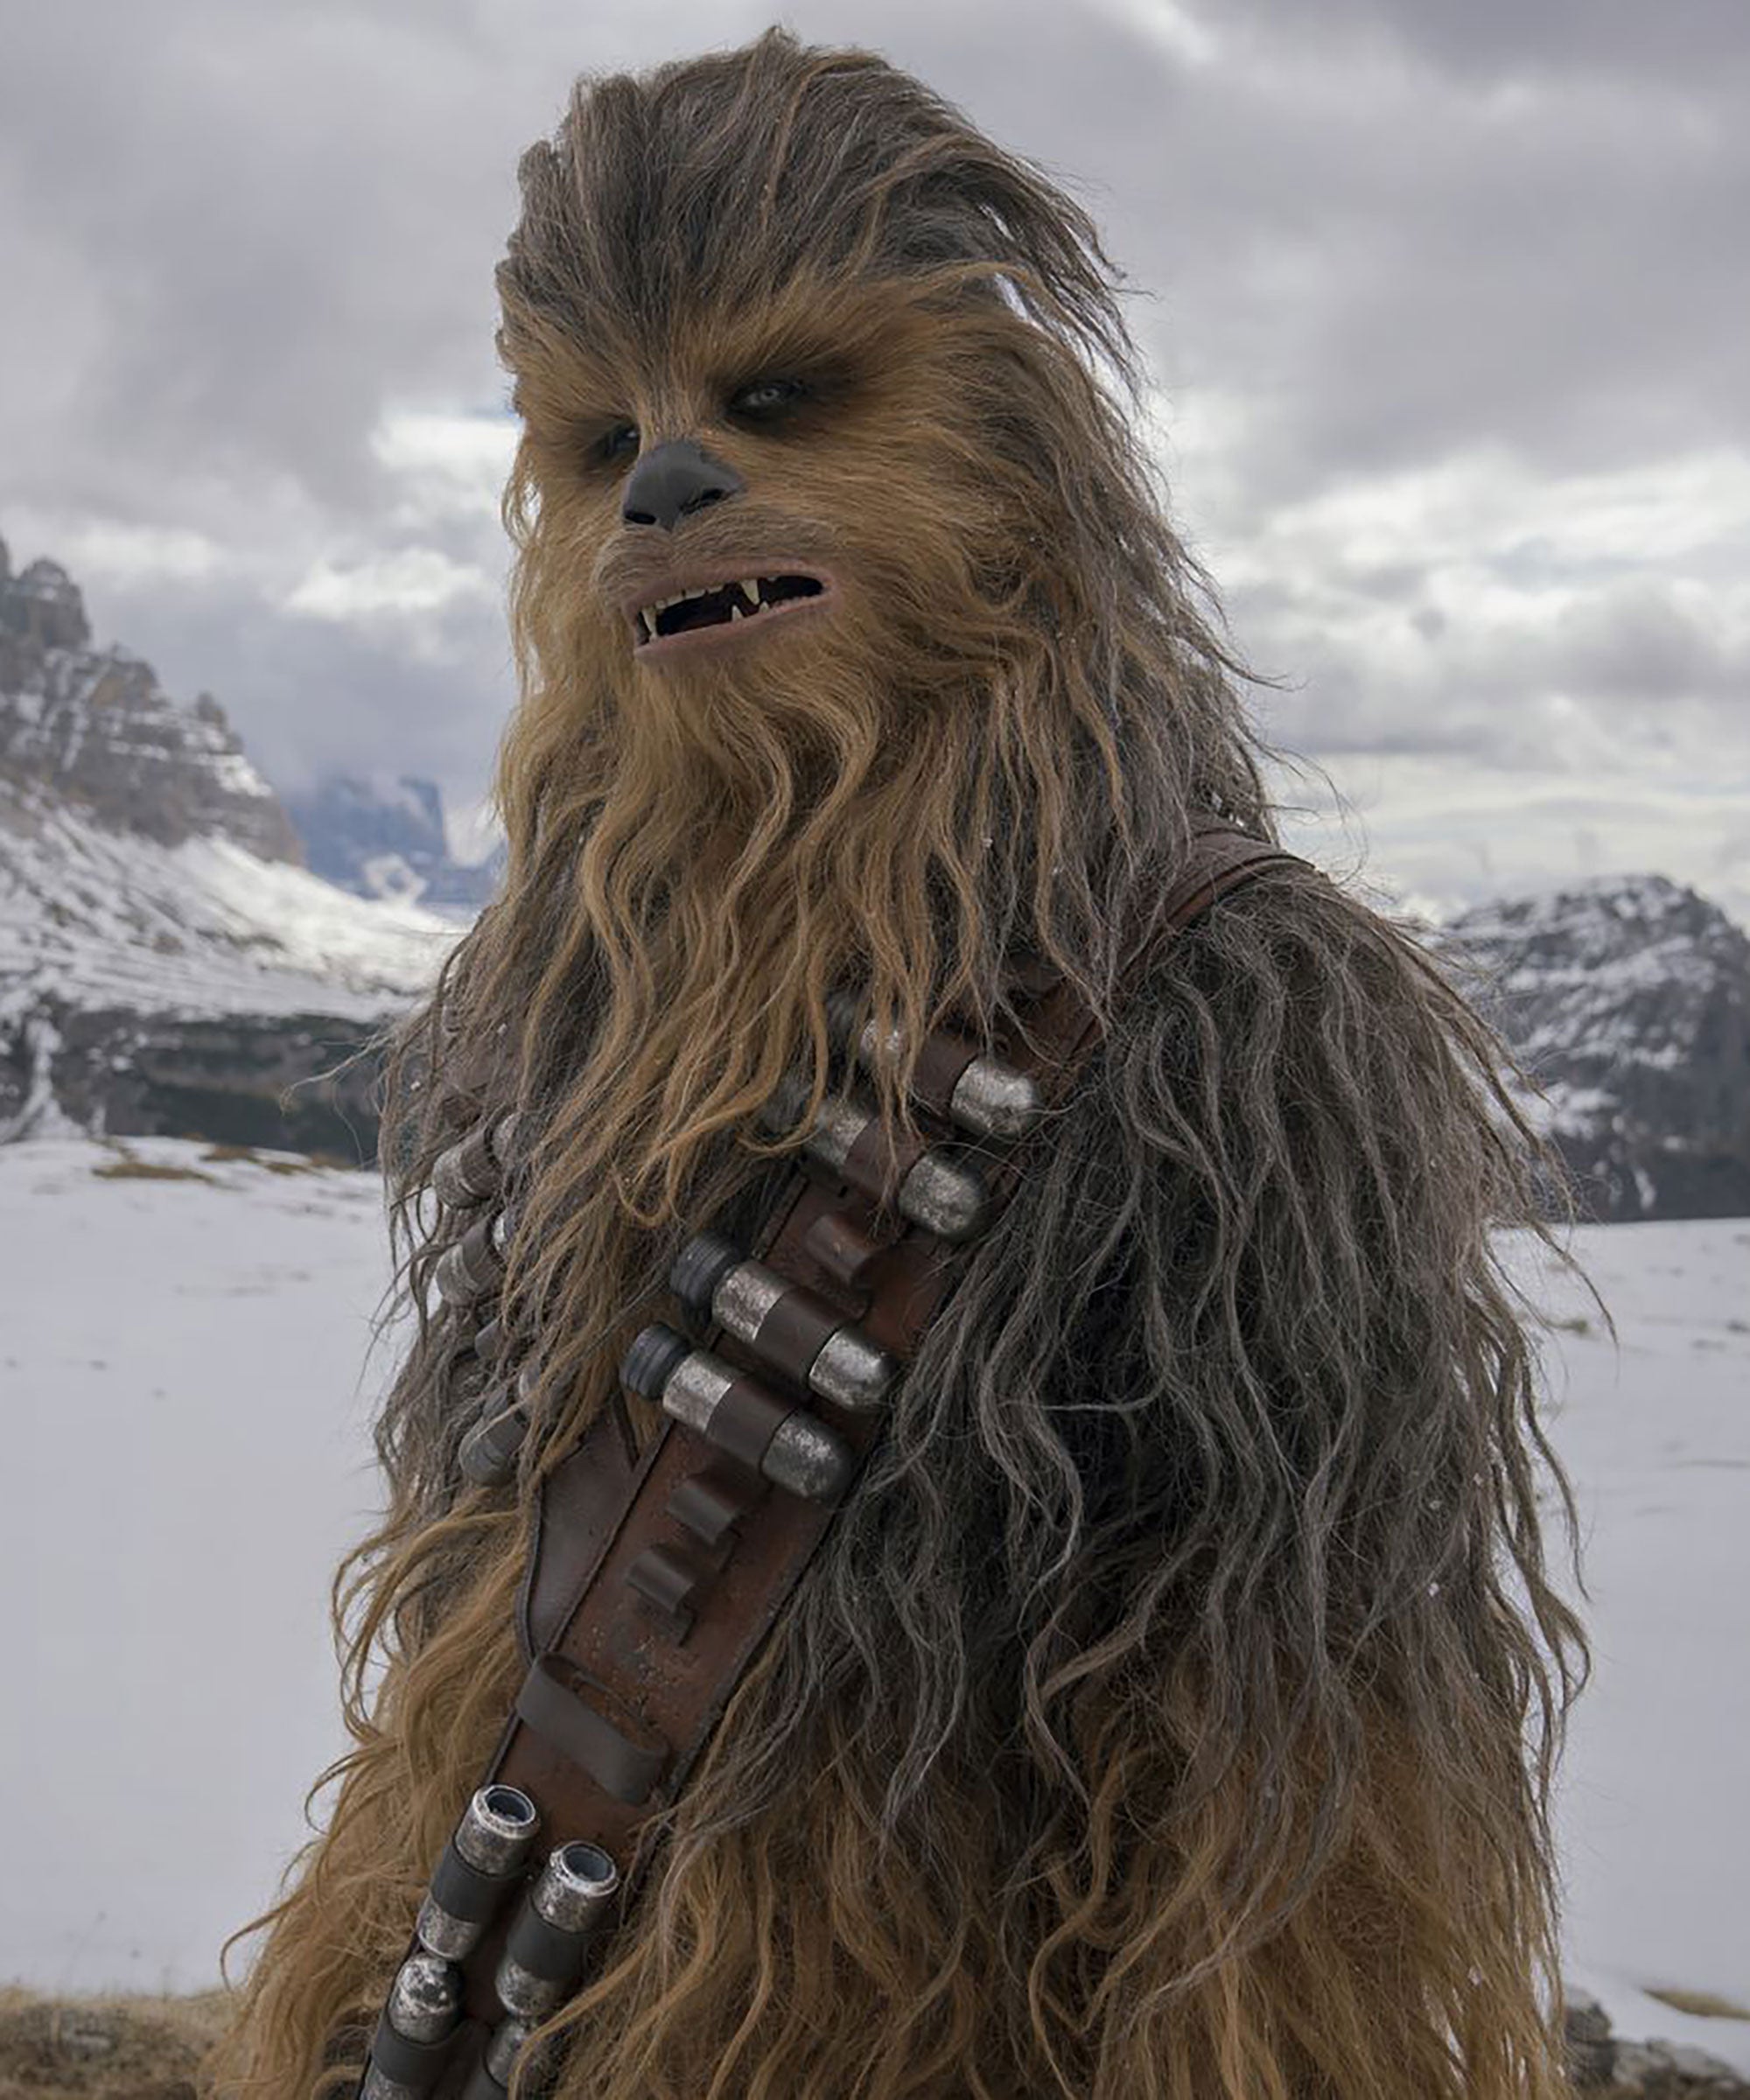 Pictures Of Chewy From Star Wars native women